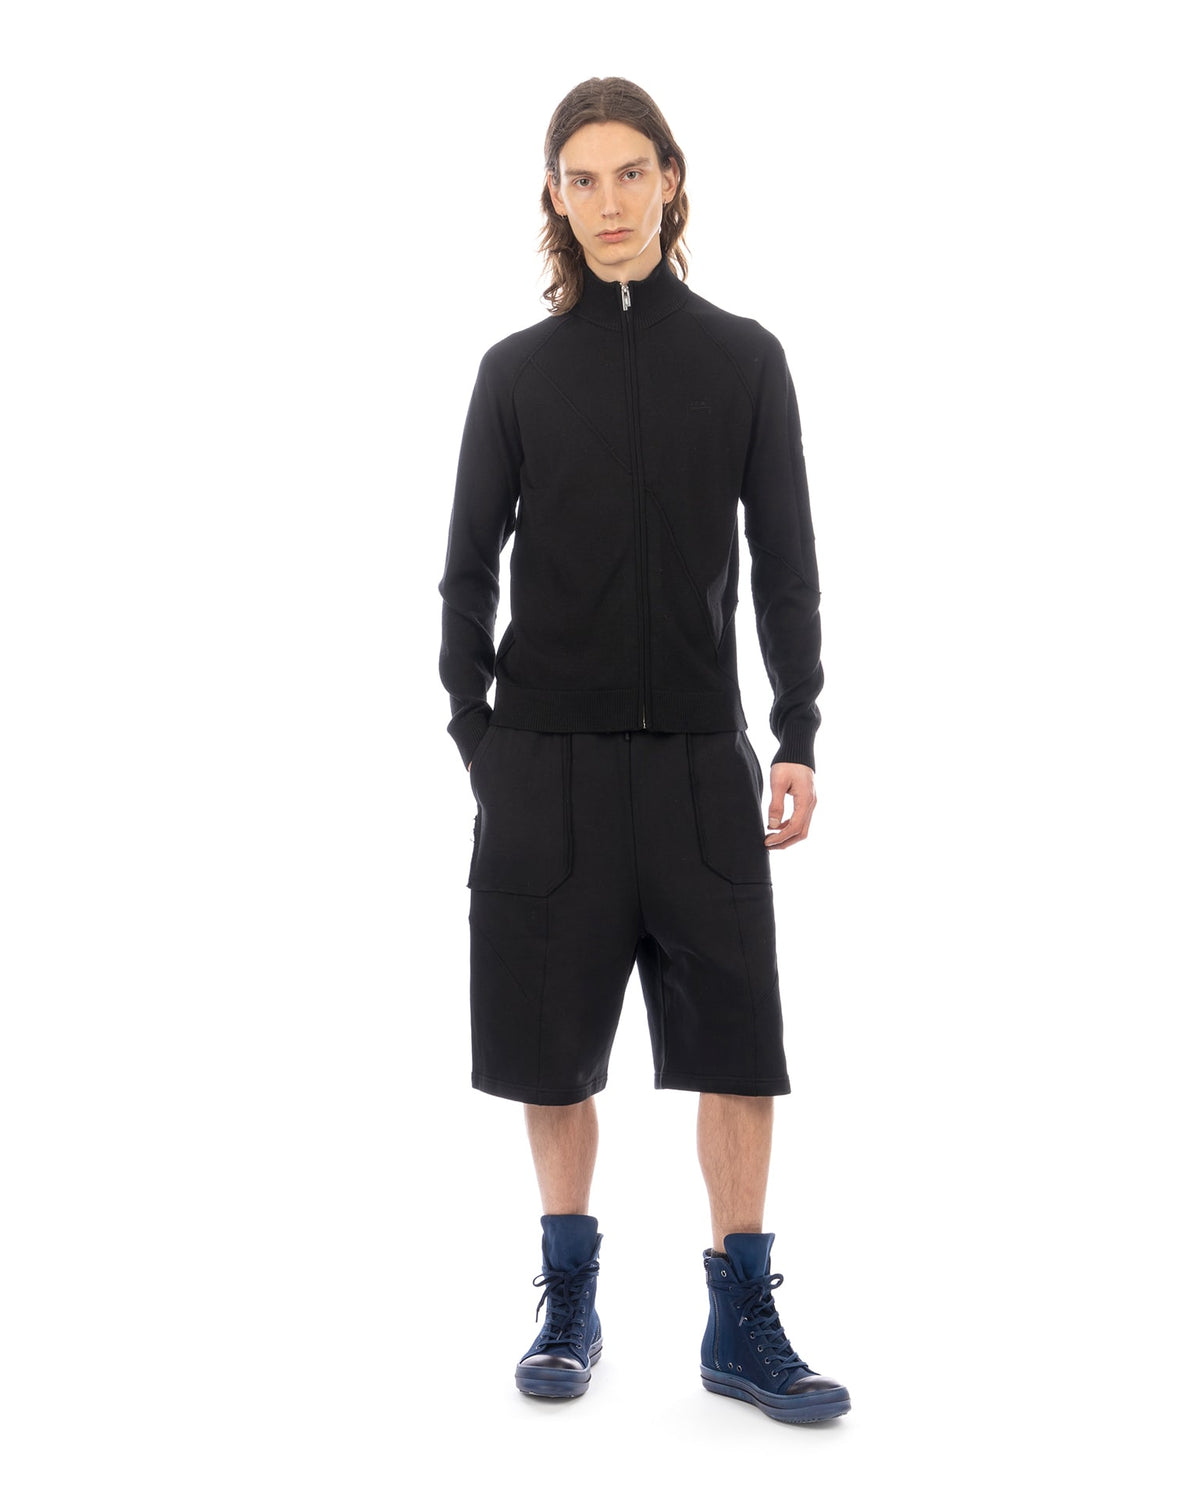 A-COLD-WALL* | Works Jersey Short Black - Concrete